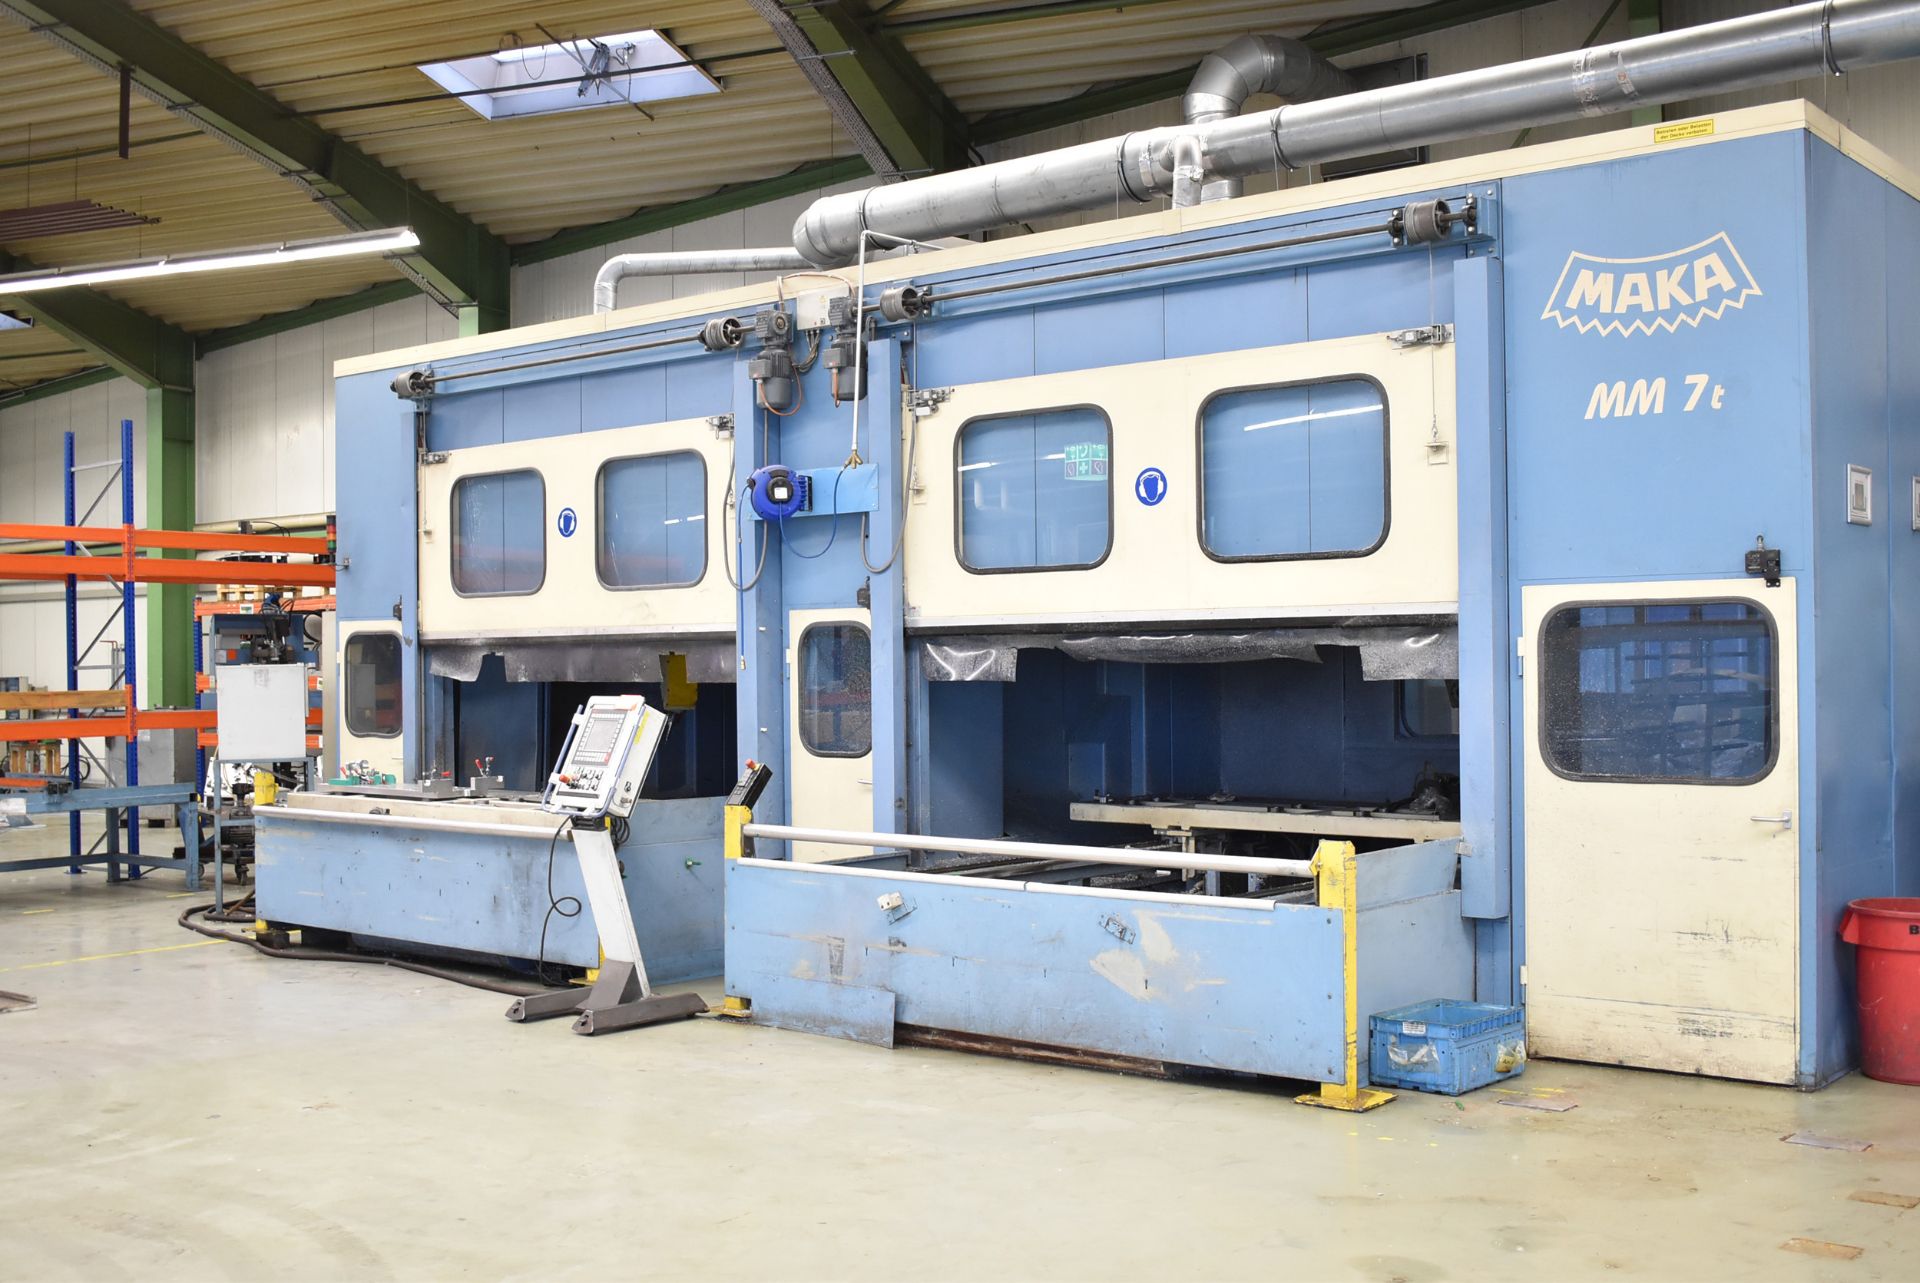 MAKA (2005) MM 7T 7 AXIS CNC MACHINING CENTER WITH BUJO CNC CONTROL, FULL SOUNDPROOF ENCLOSURE - Image 3 of 13